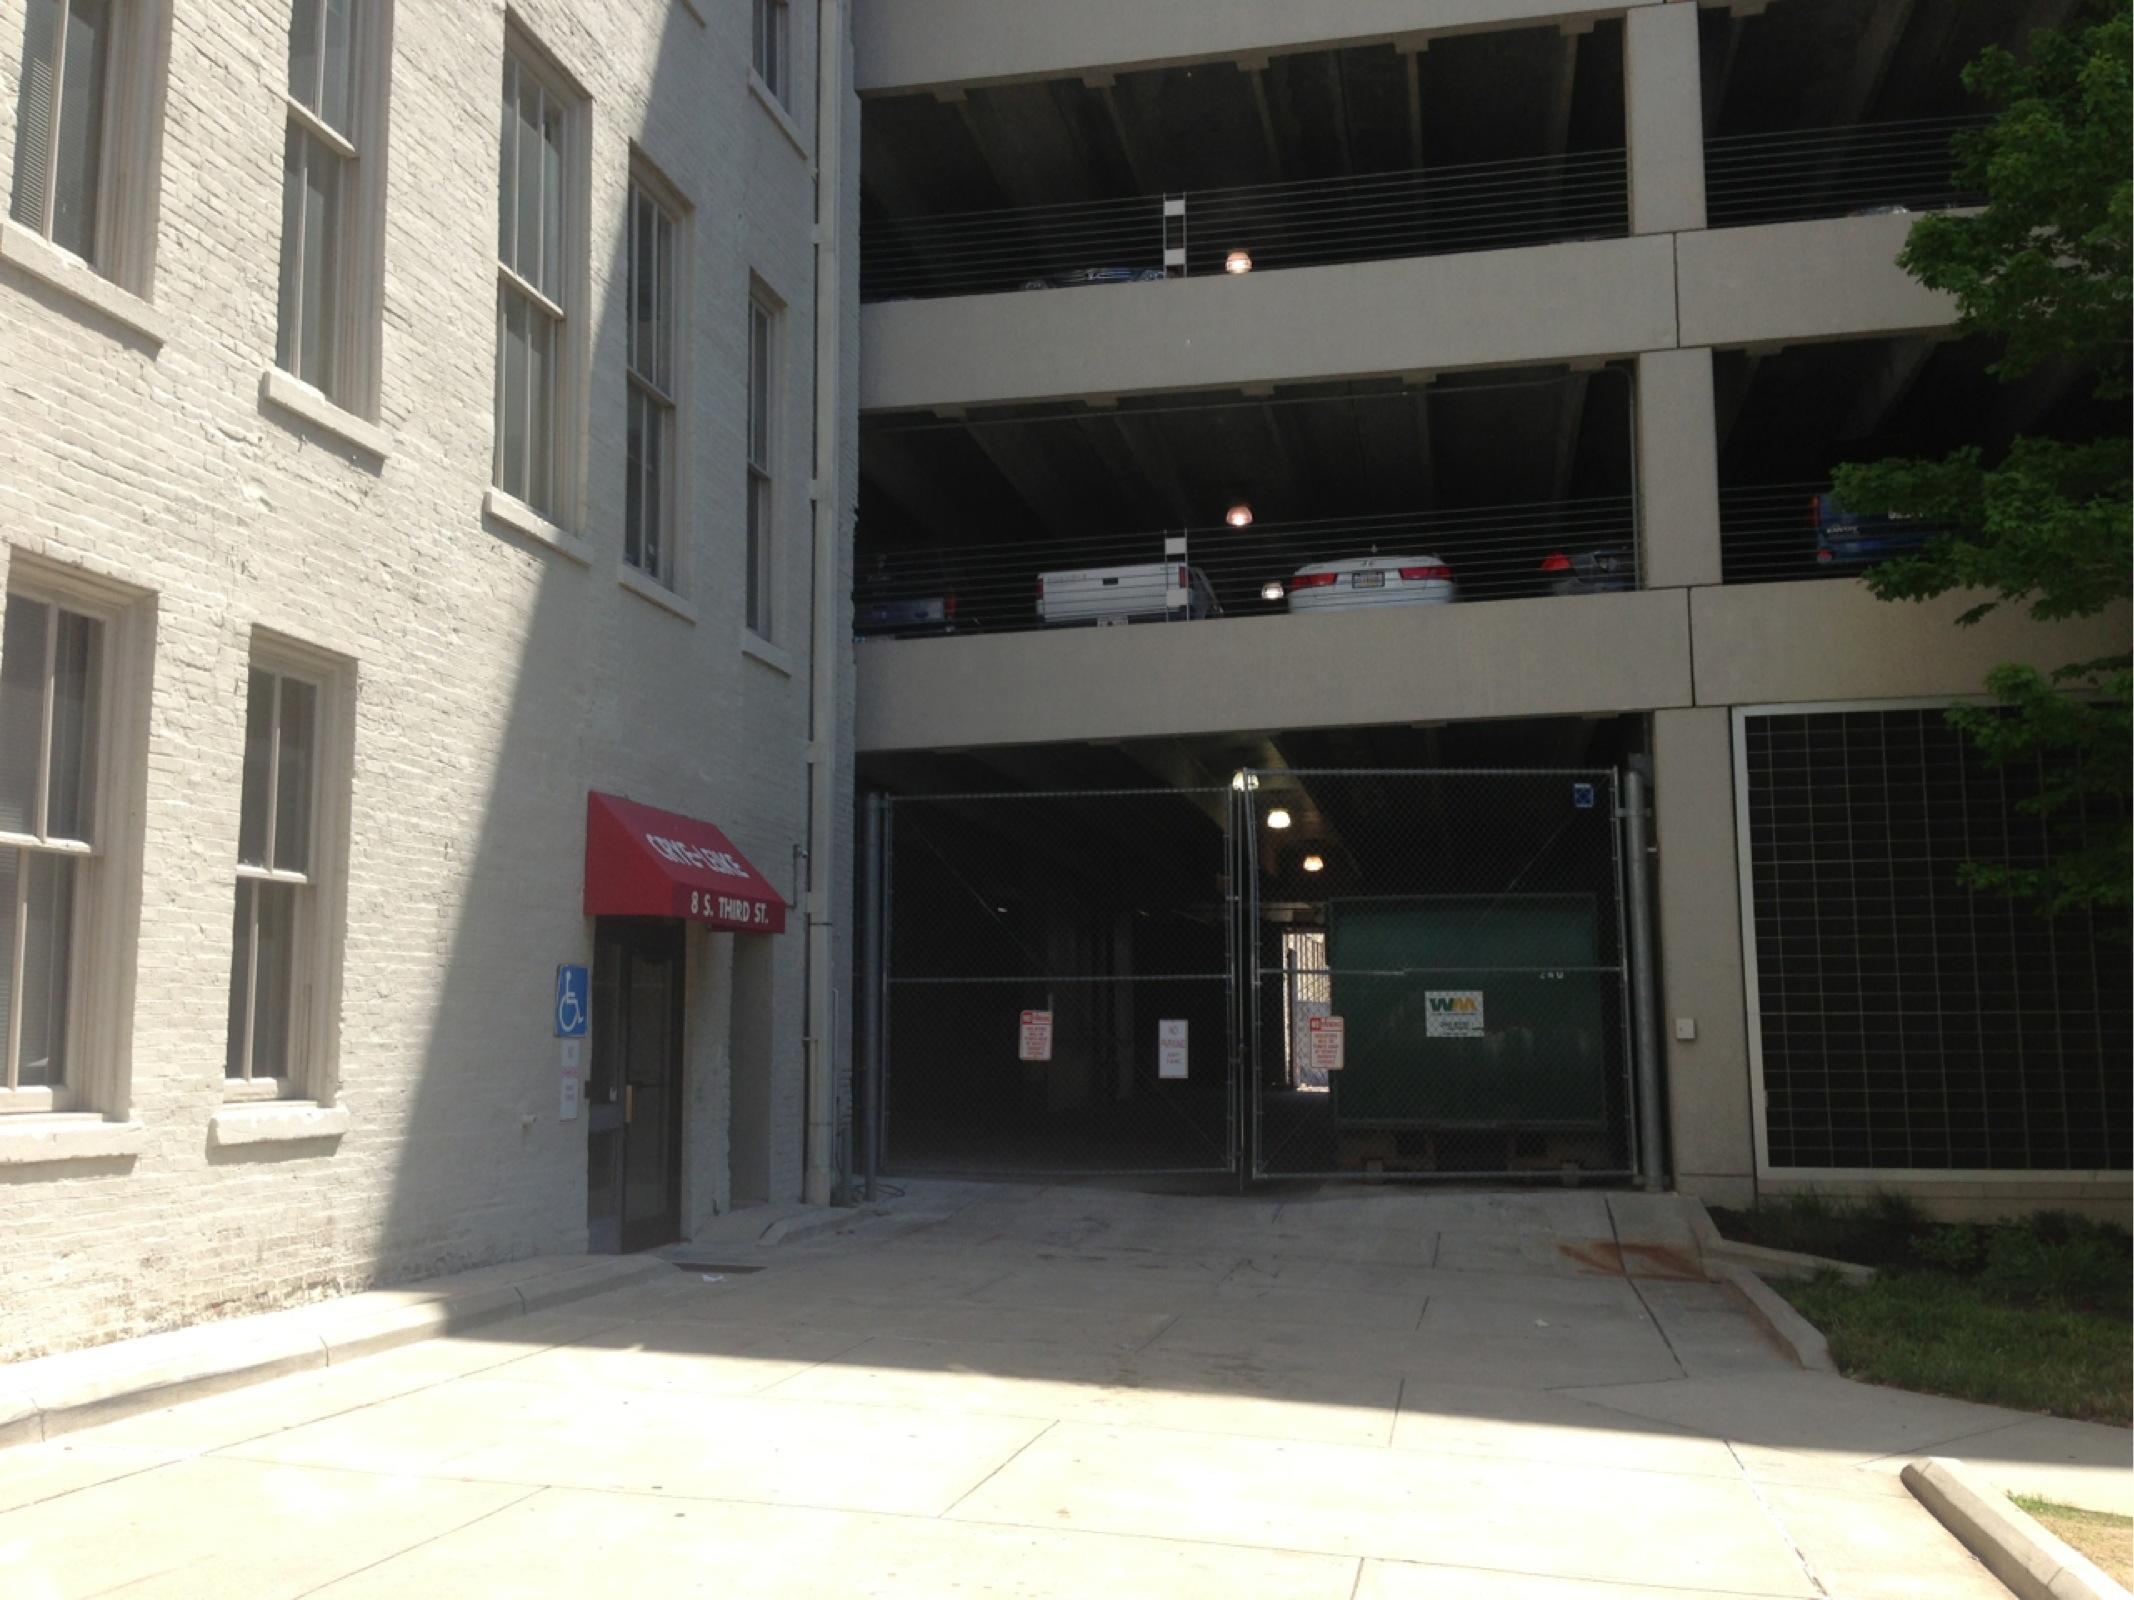 First Tennessee Garage - Parking in Memphis | ParkMe